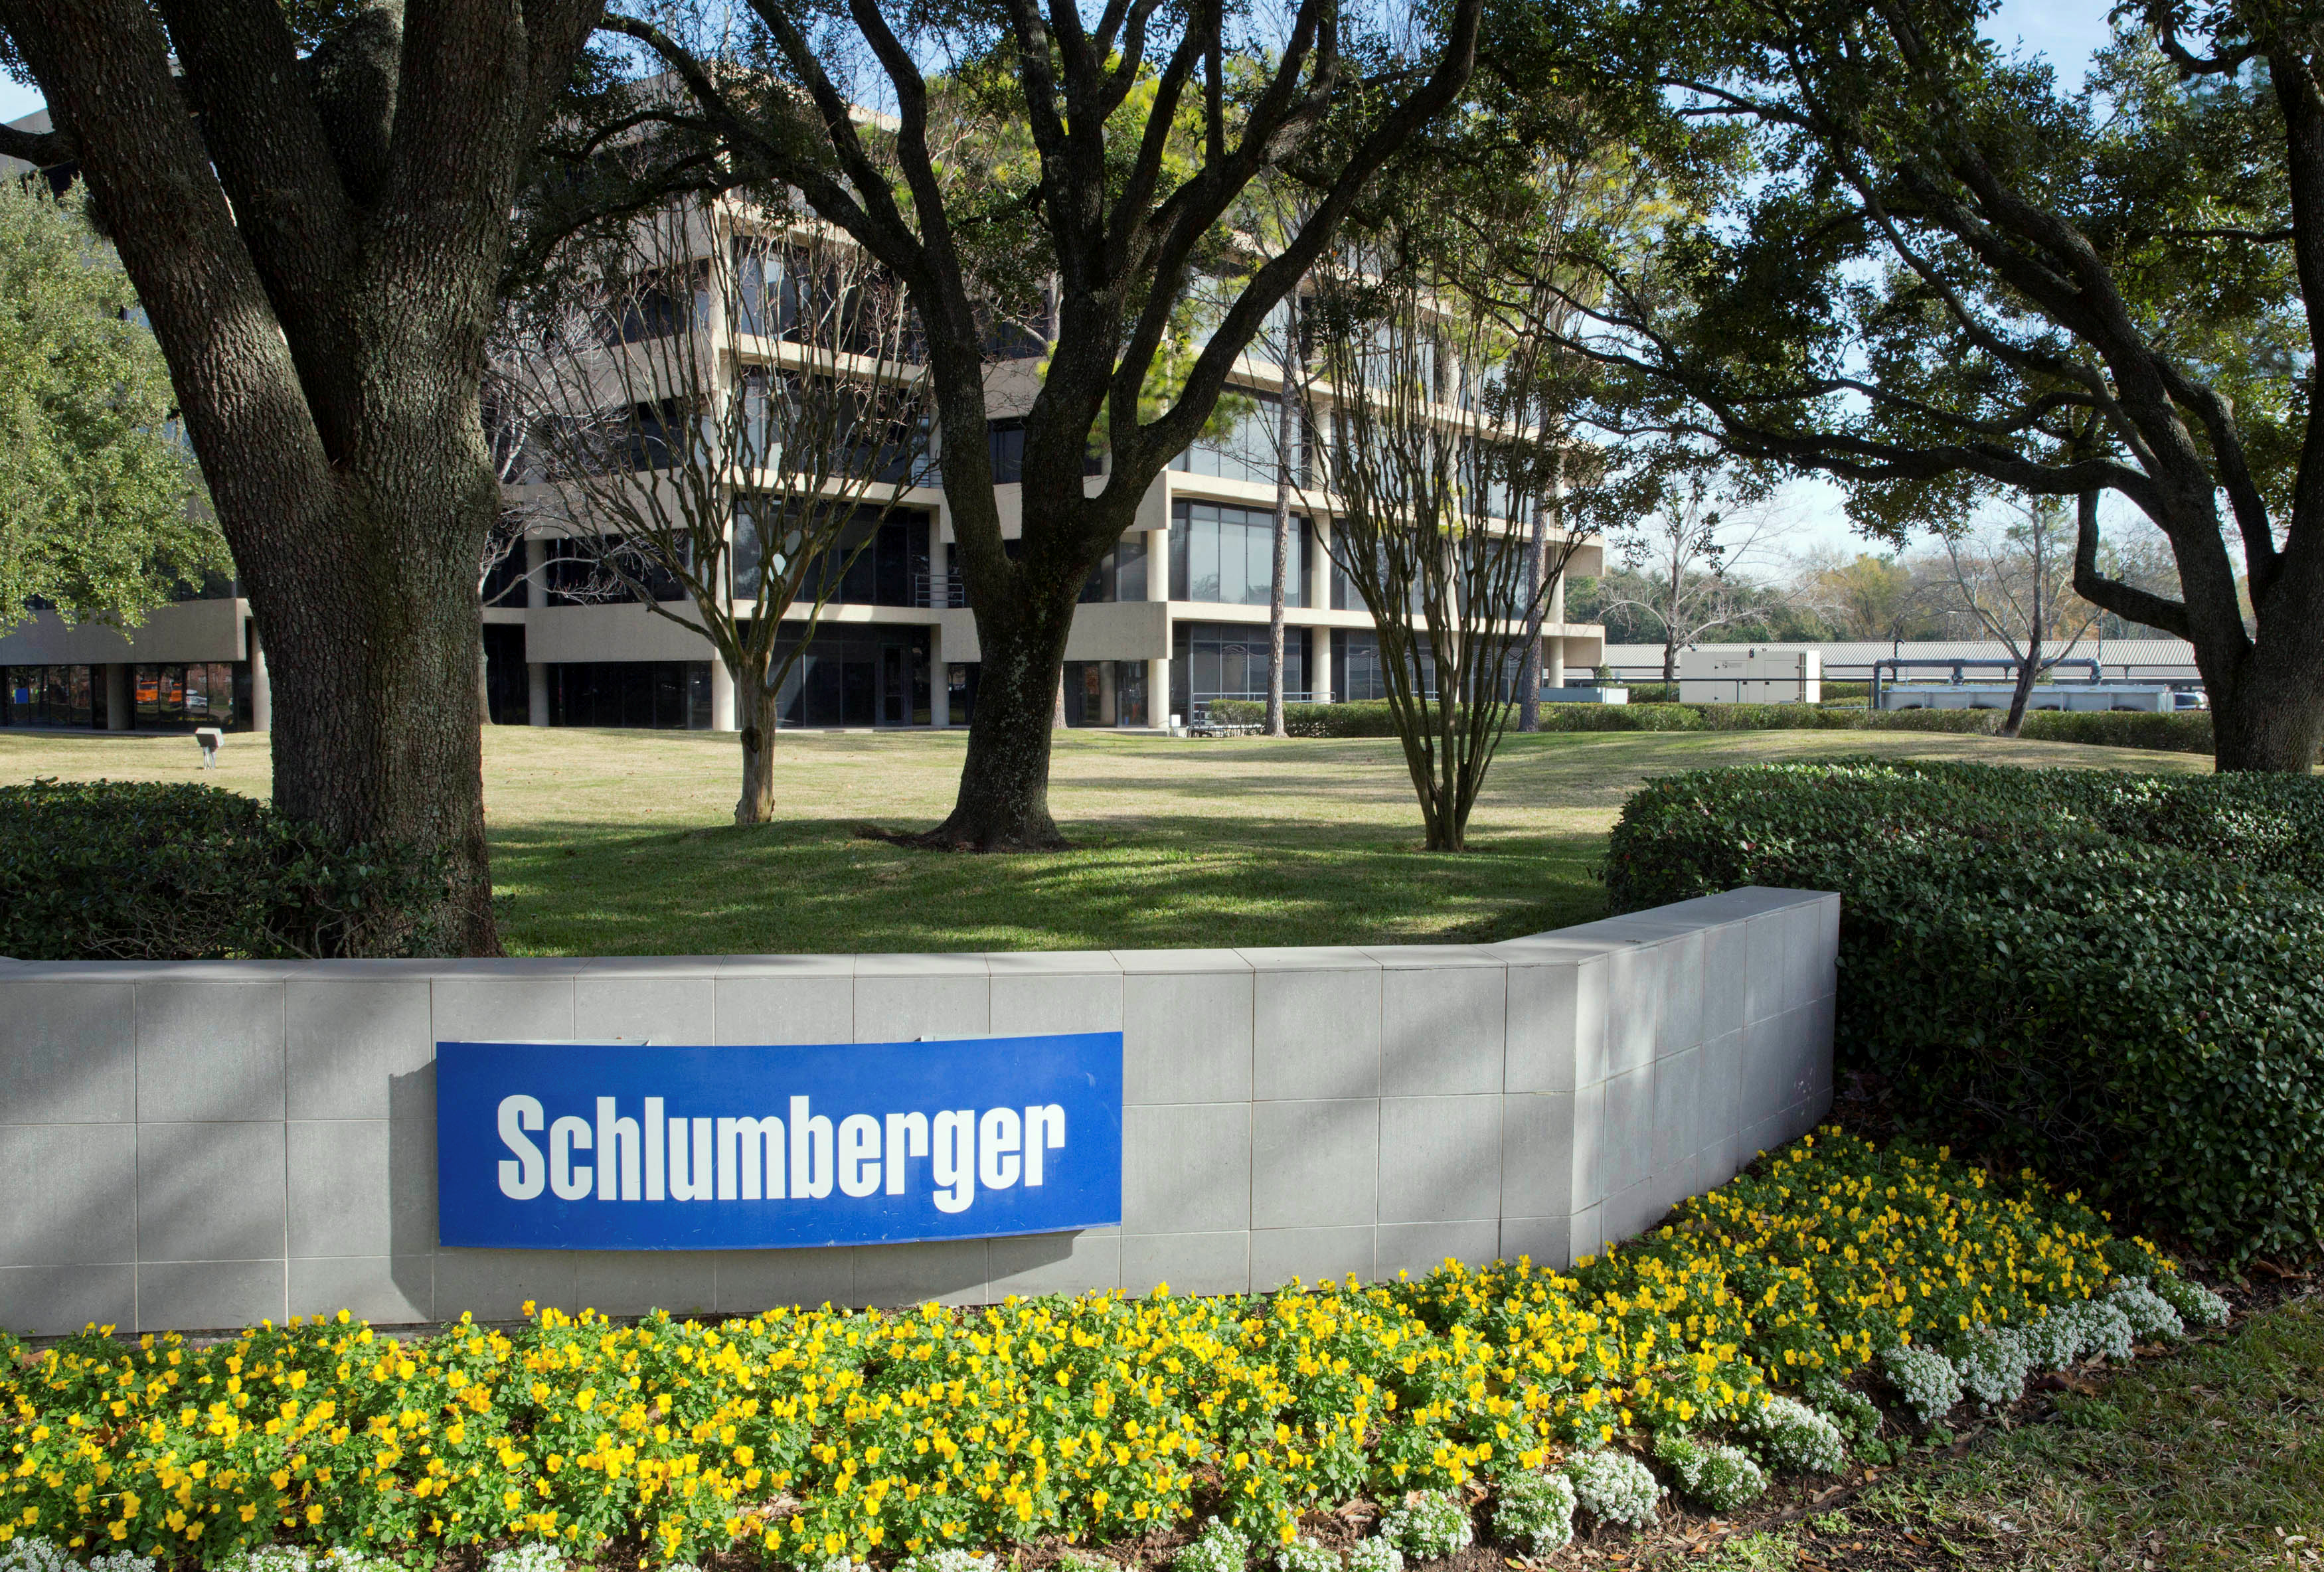 The exterior of a Schlumberger Corporation building is pictured in West Houston